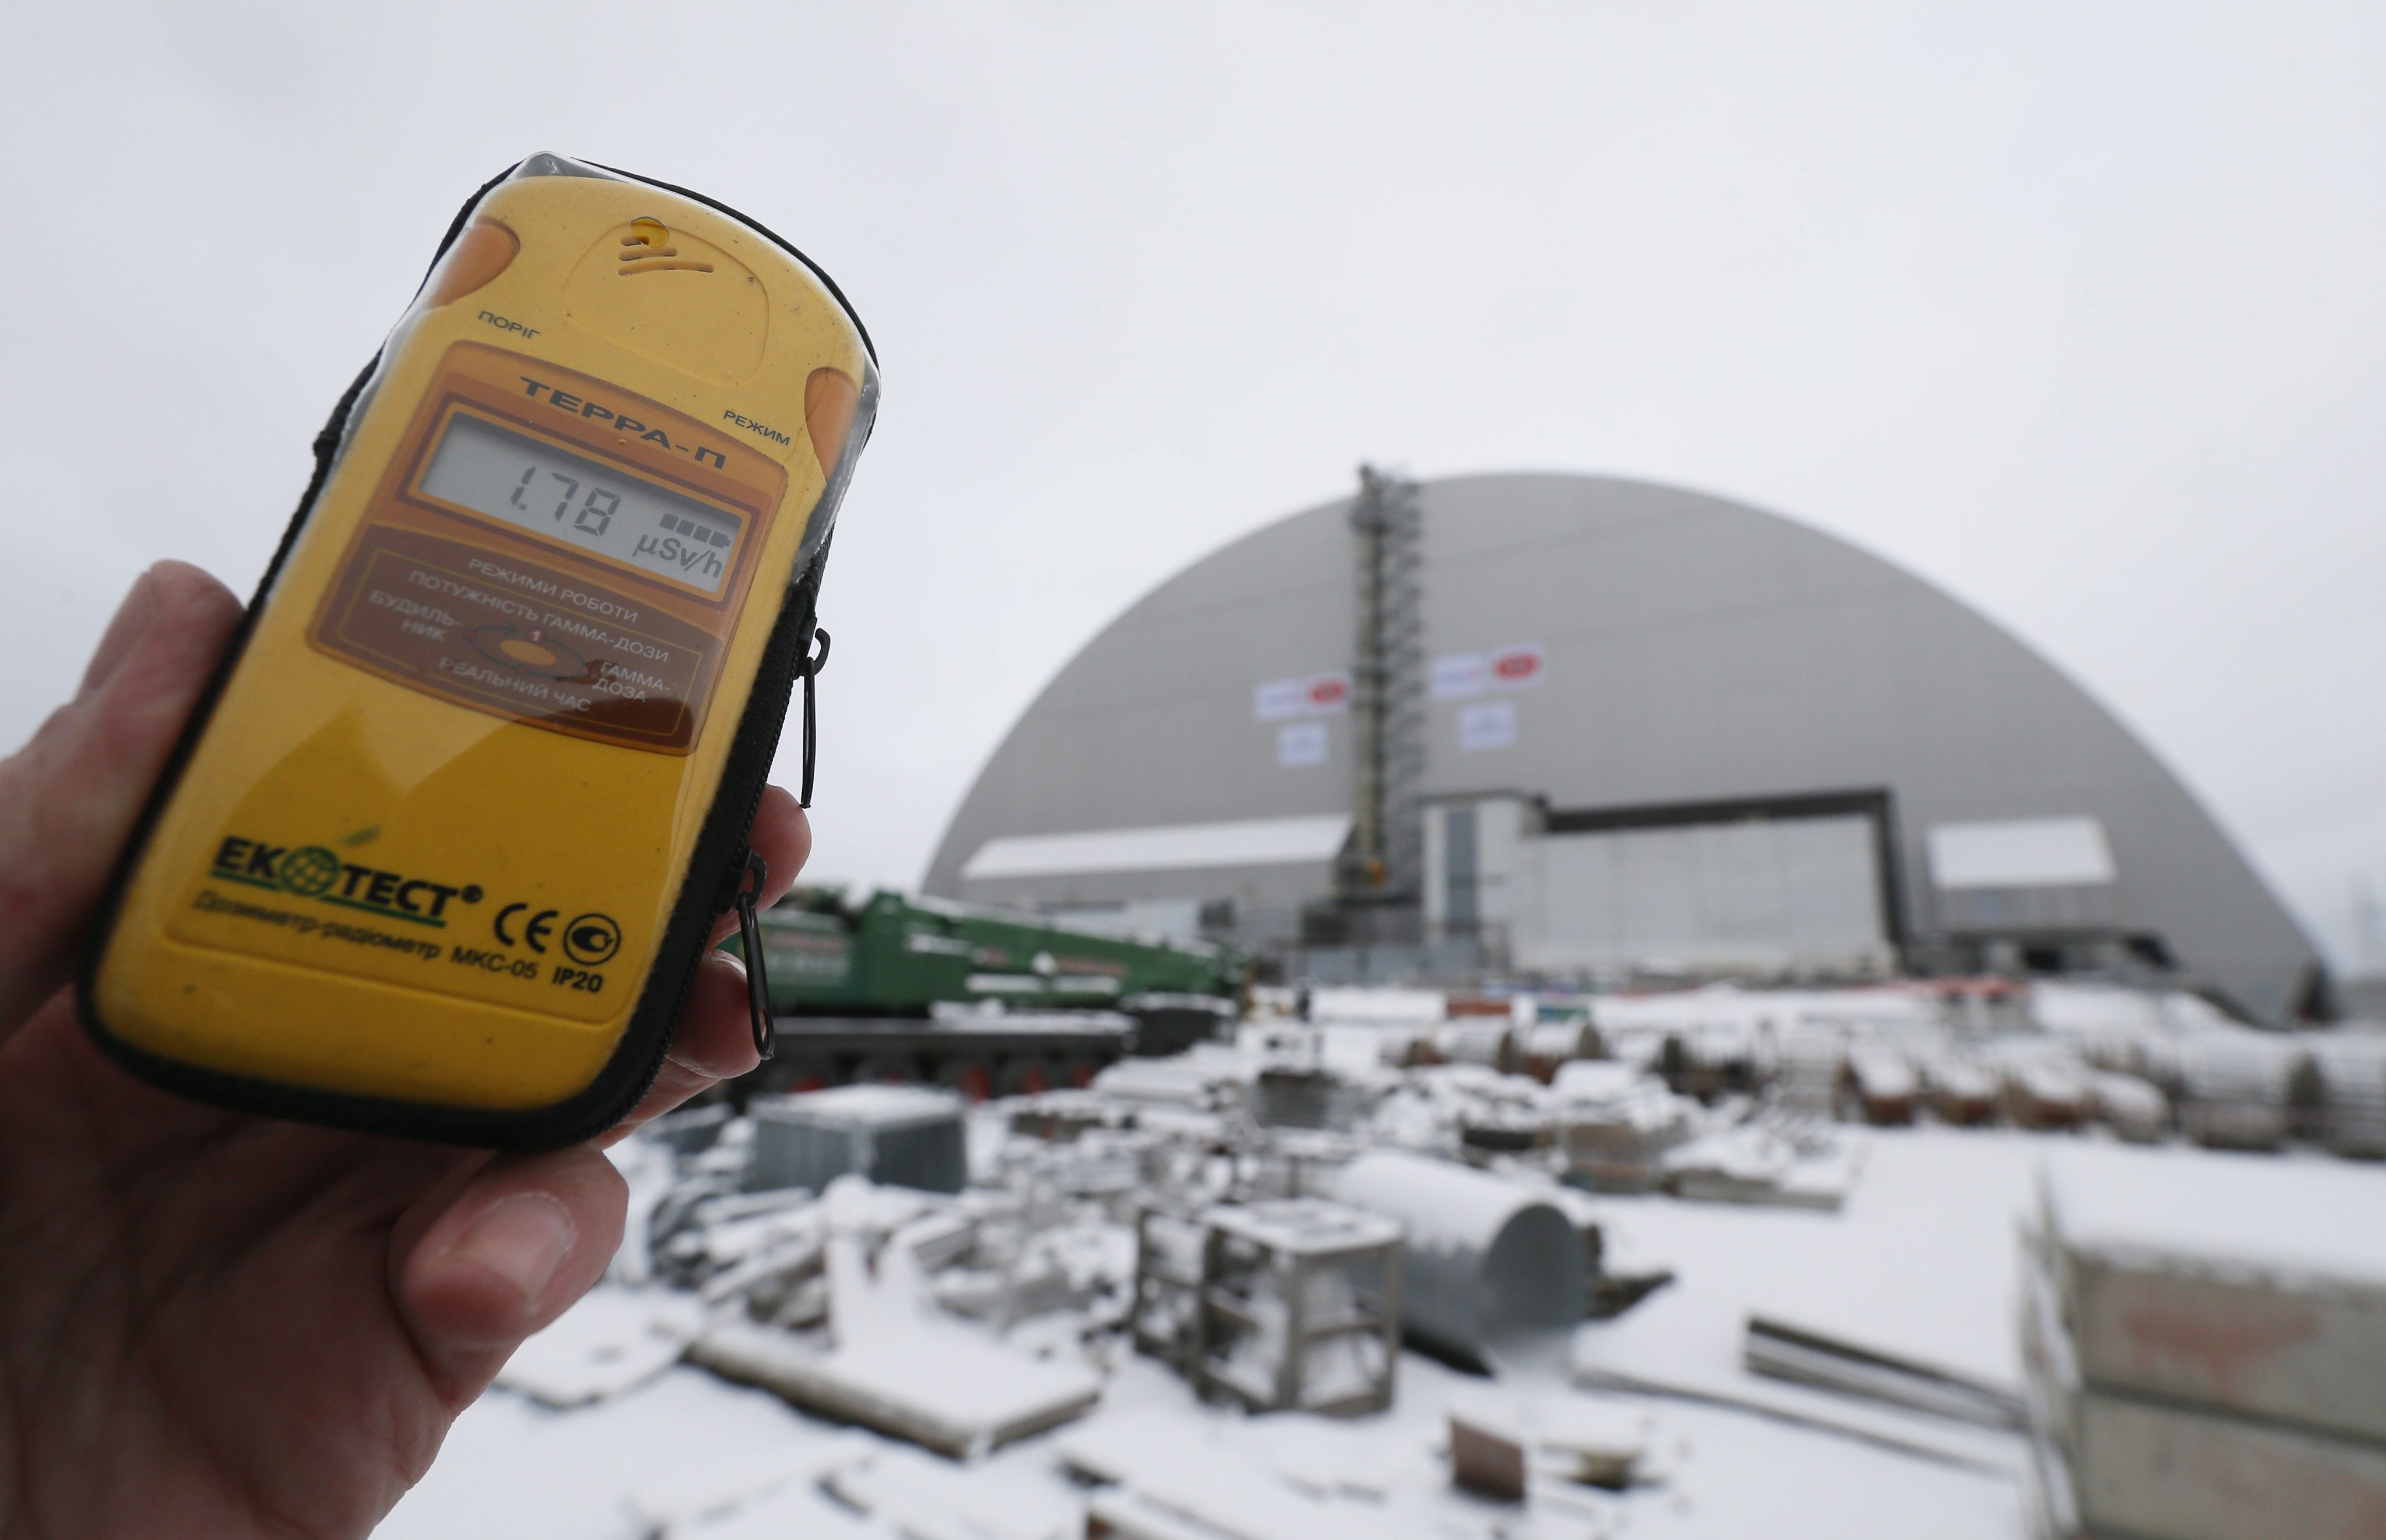 A dosimeter shows the radiation level near the Chernobyl nuclear power plant in Ukraine, in a file photo taken last year. Automatic monitoring systems at the disaster site were taken offline by a cyber attack that forced staff to check radiation levels with hand-held meters on Tuesday. Photo: EPA